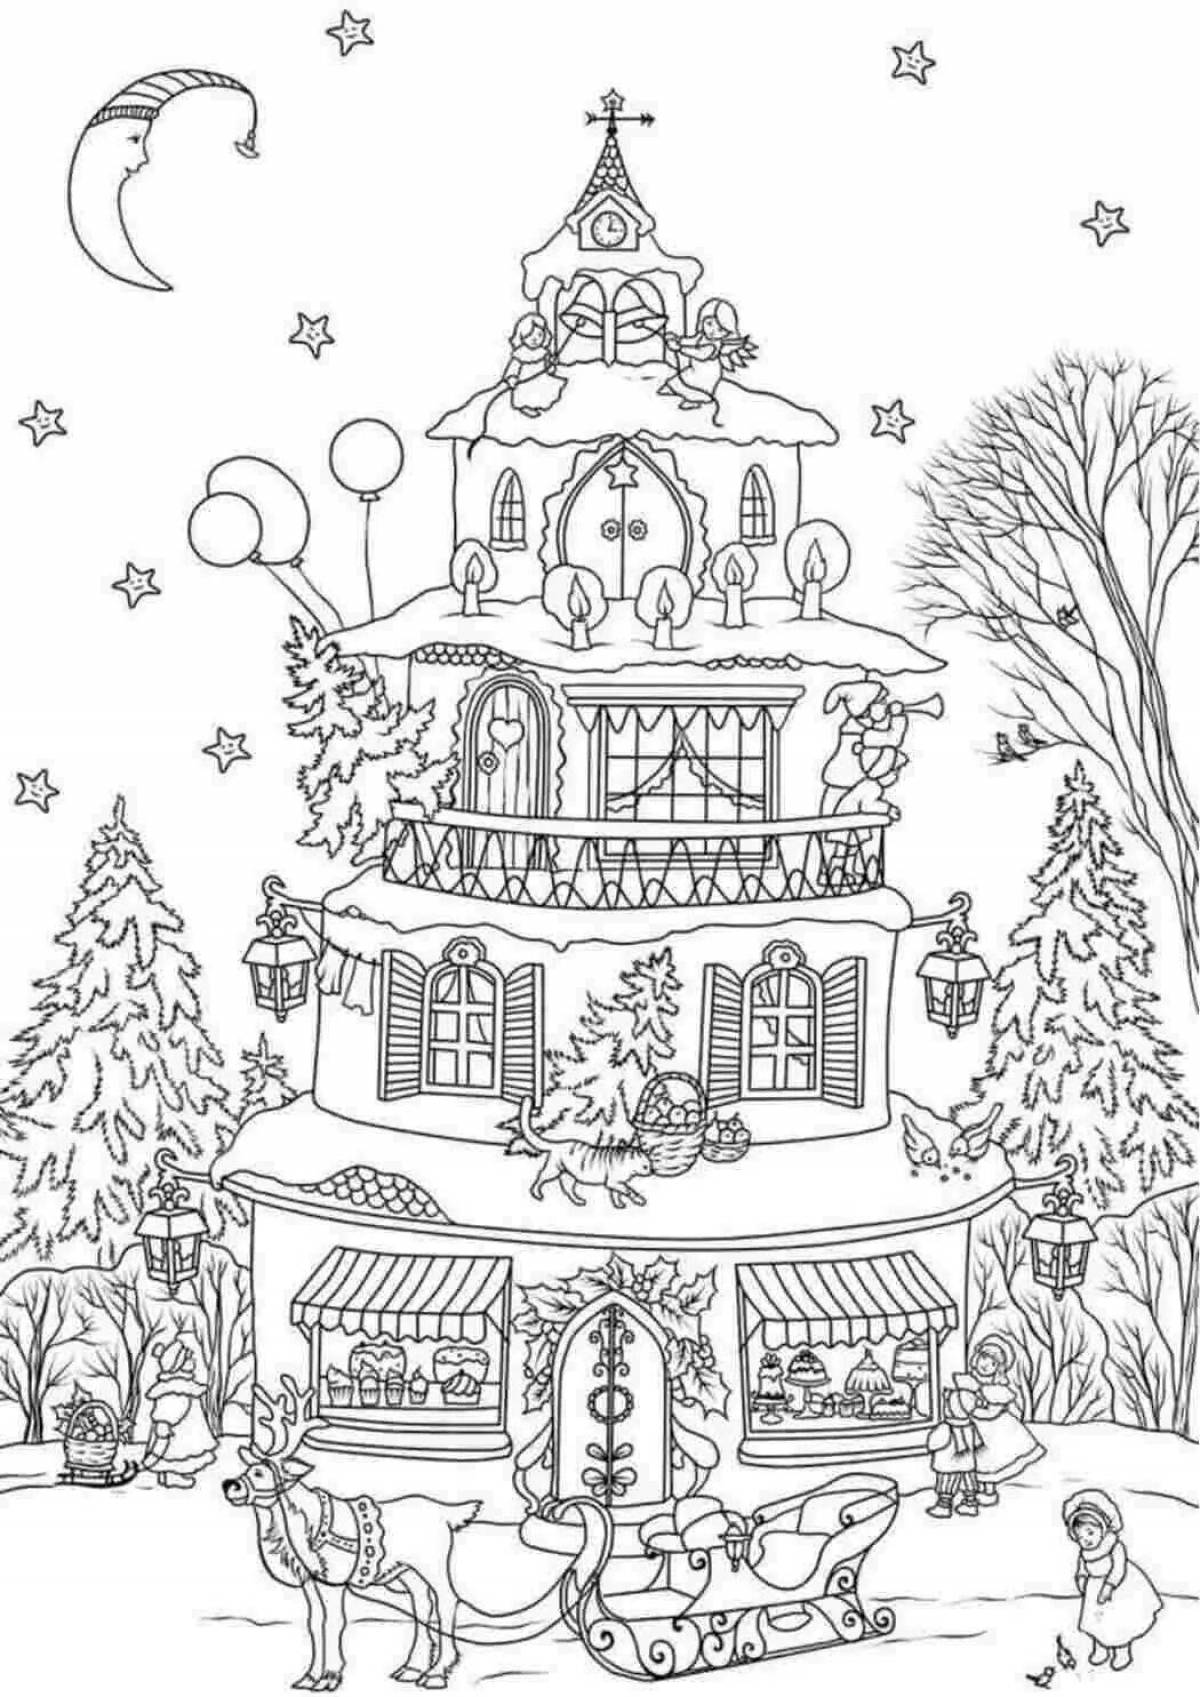 Elegant new year castle coloring book